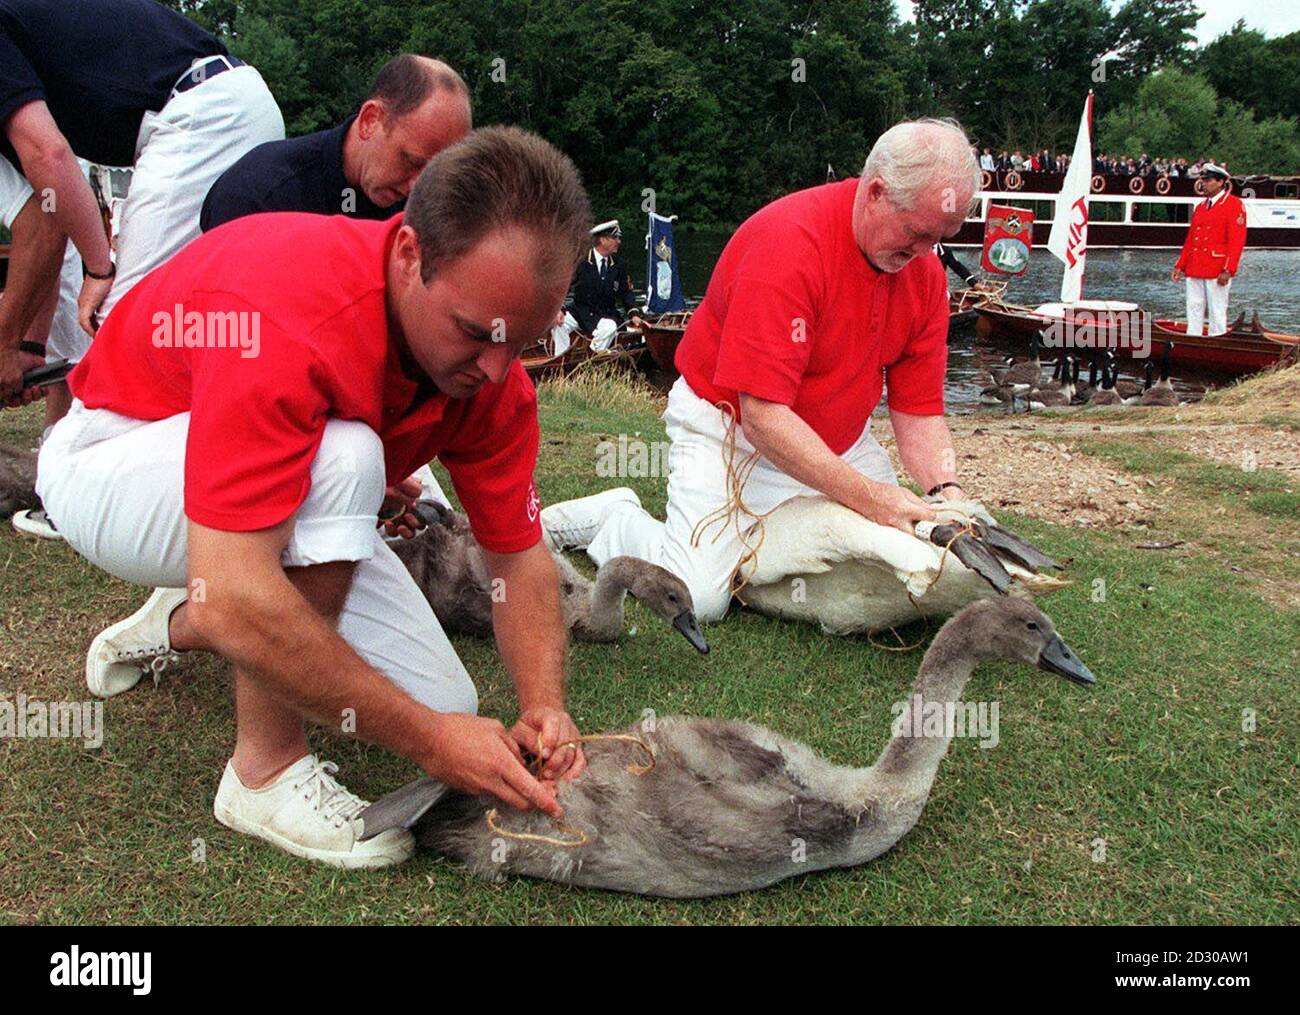 Swan Upping - the annual count of the Queen's swans taking place on the banks of the River Thames, Marlow, Barks. The swans and cygnets were released back into the river after being counted and tagged.  Stock Photo